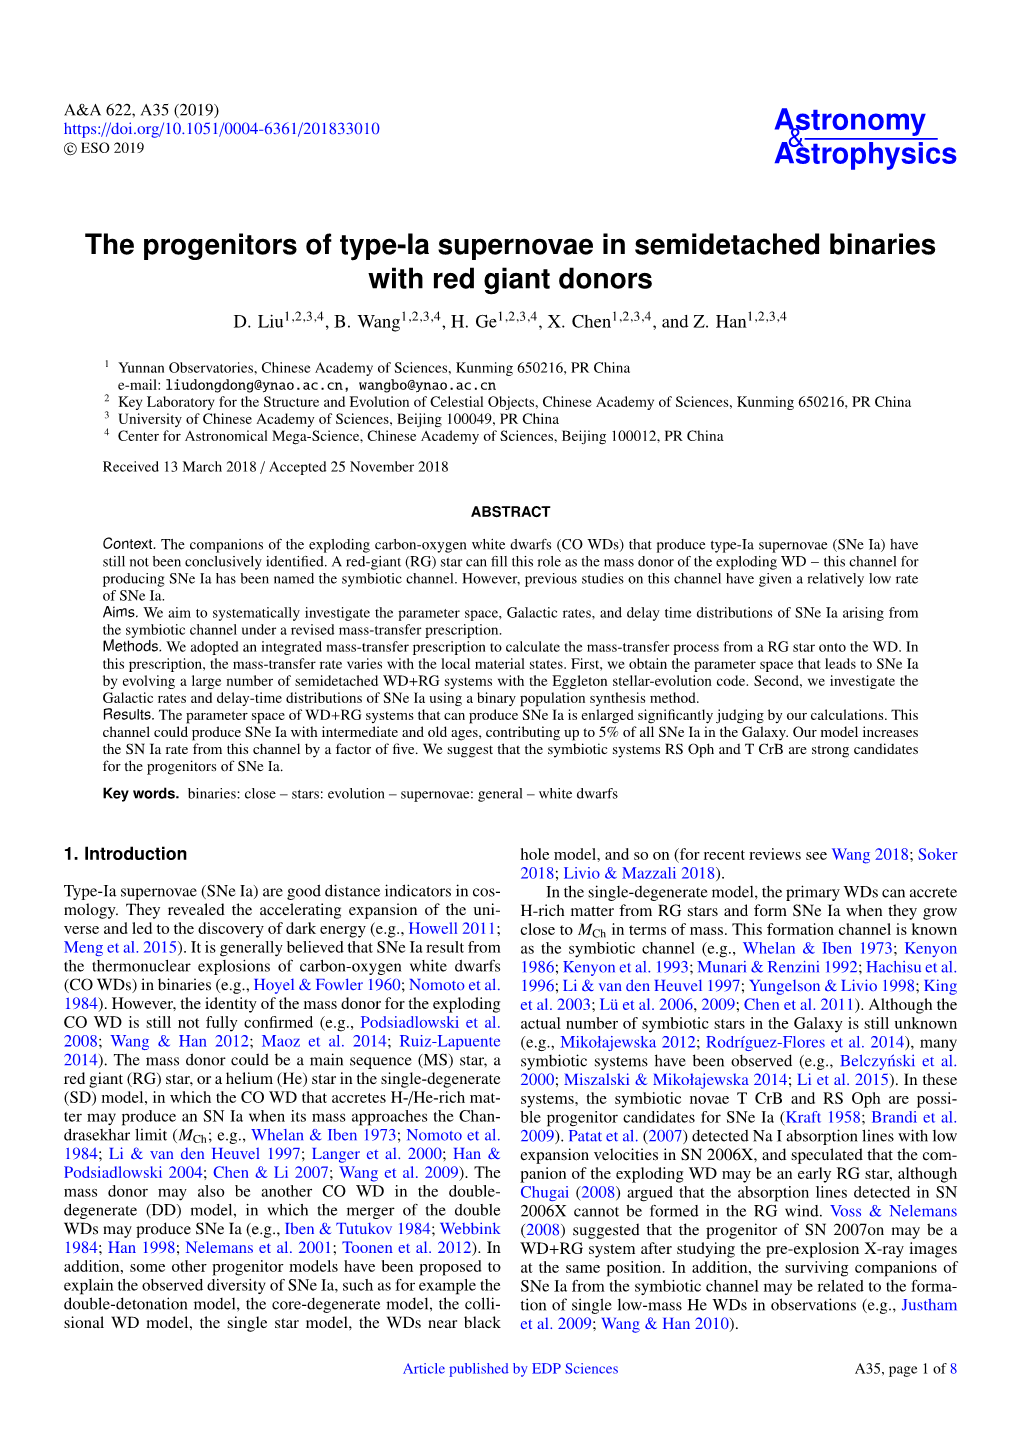 The Progenitors of Type-Ia Supernovae in Semidetached Binaries with Red Giant Donors D